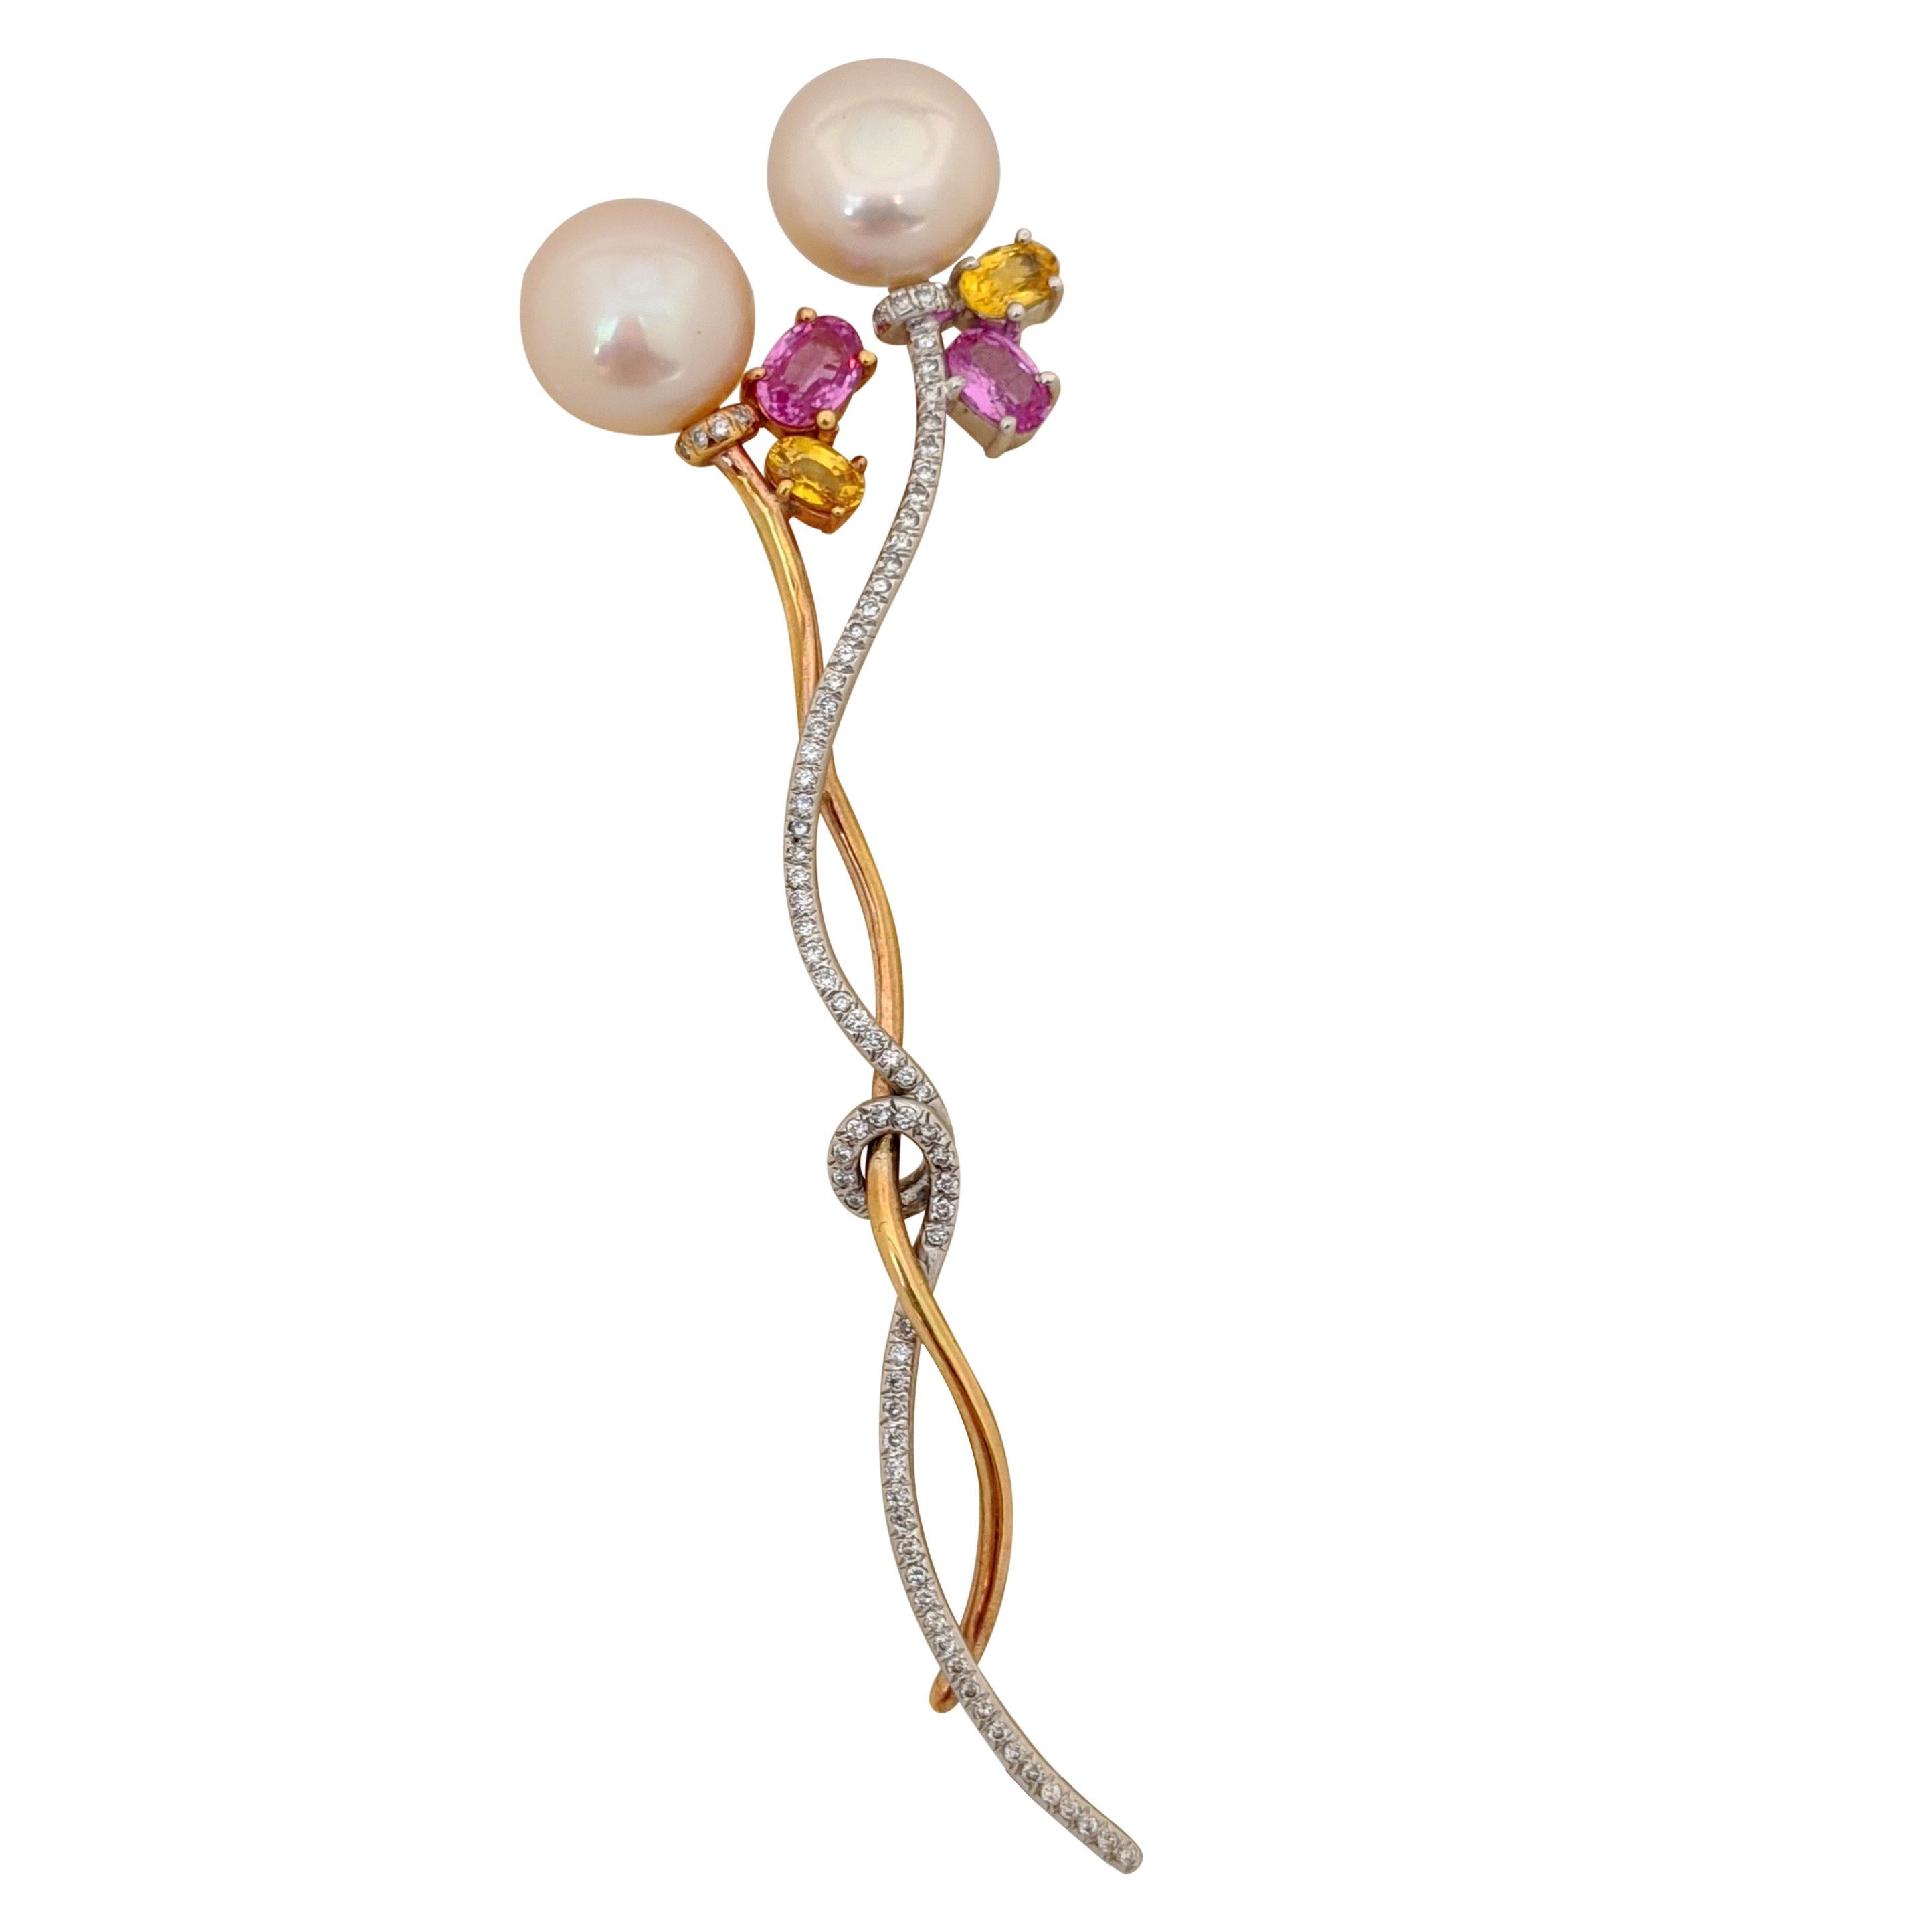 18 Karat White and Rose Gold Brooch with Diamonds, Pearls and Colored Sapphires